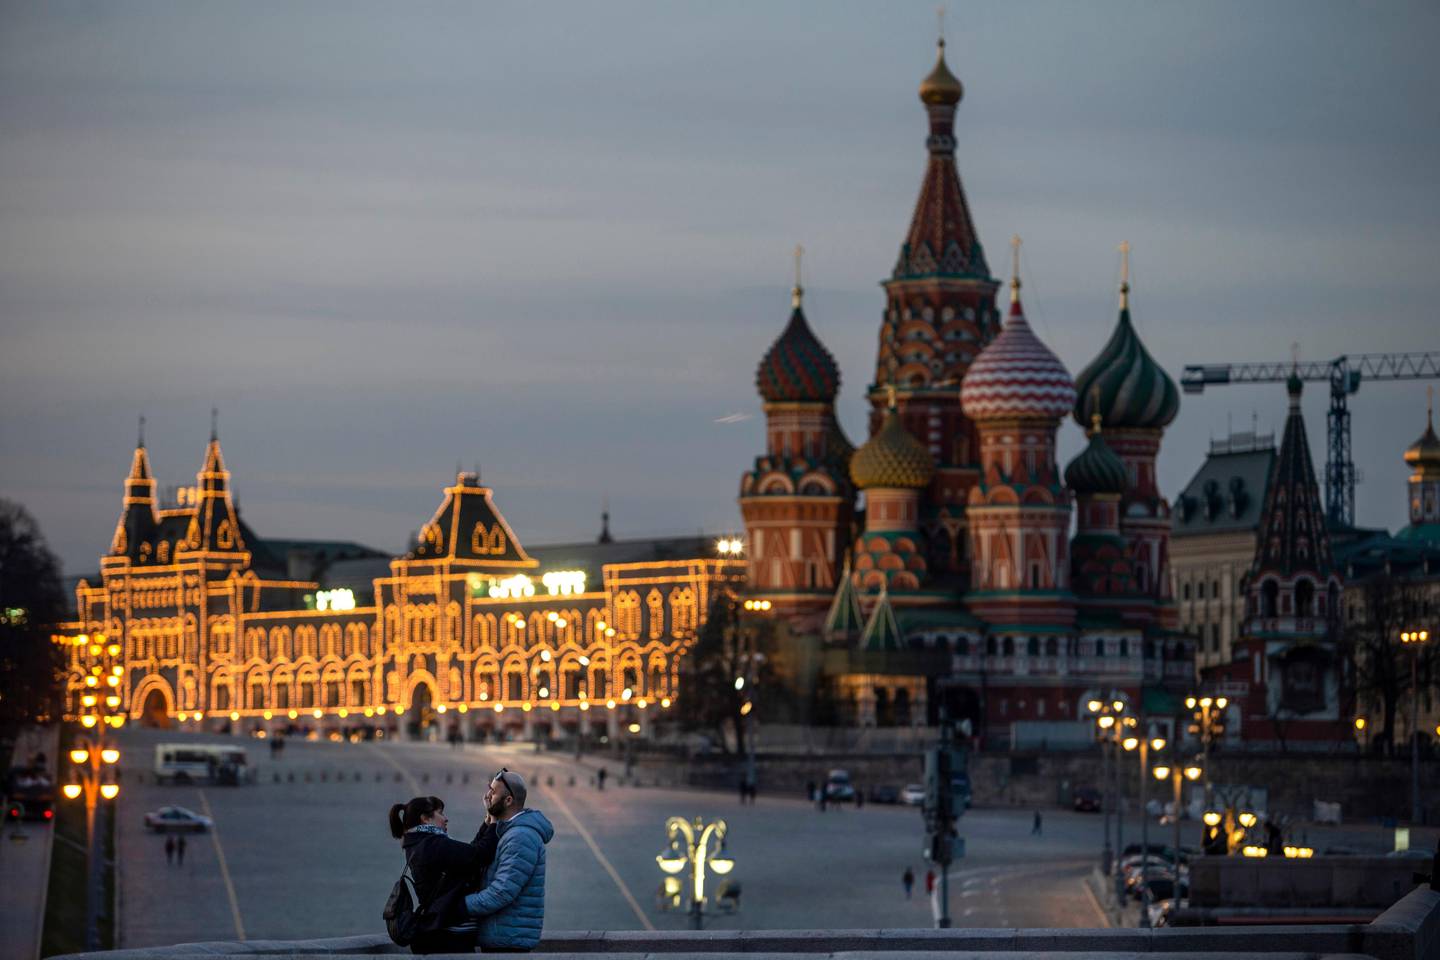 A couple enjoy warm weather on a bridge with St. Basil's Cathedral, right, and an almost empty Red Square after sunset in Moscow, Russia, on Saturday, March, 28, 2020. The new coronavirus causes mild or moderate symptoms for most people, but for some, especially older adults and people with existing health problems, it can cause more severe illness or death. (AP Photo/Alexander Zemlianichenko Jr)